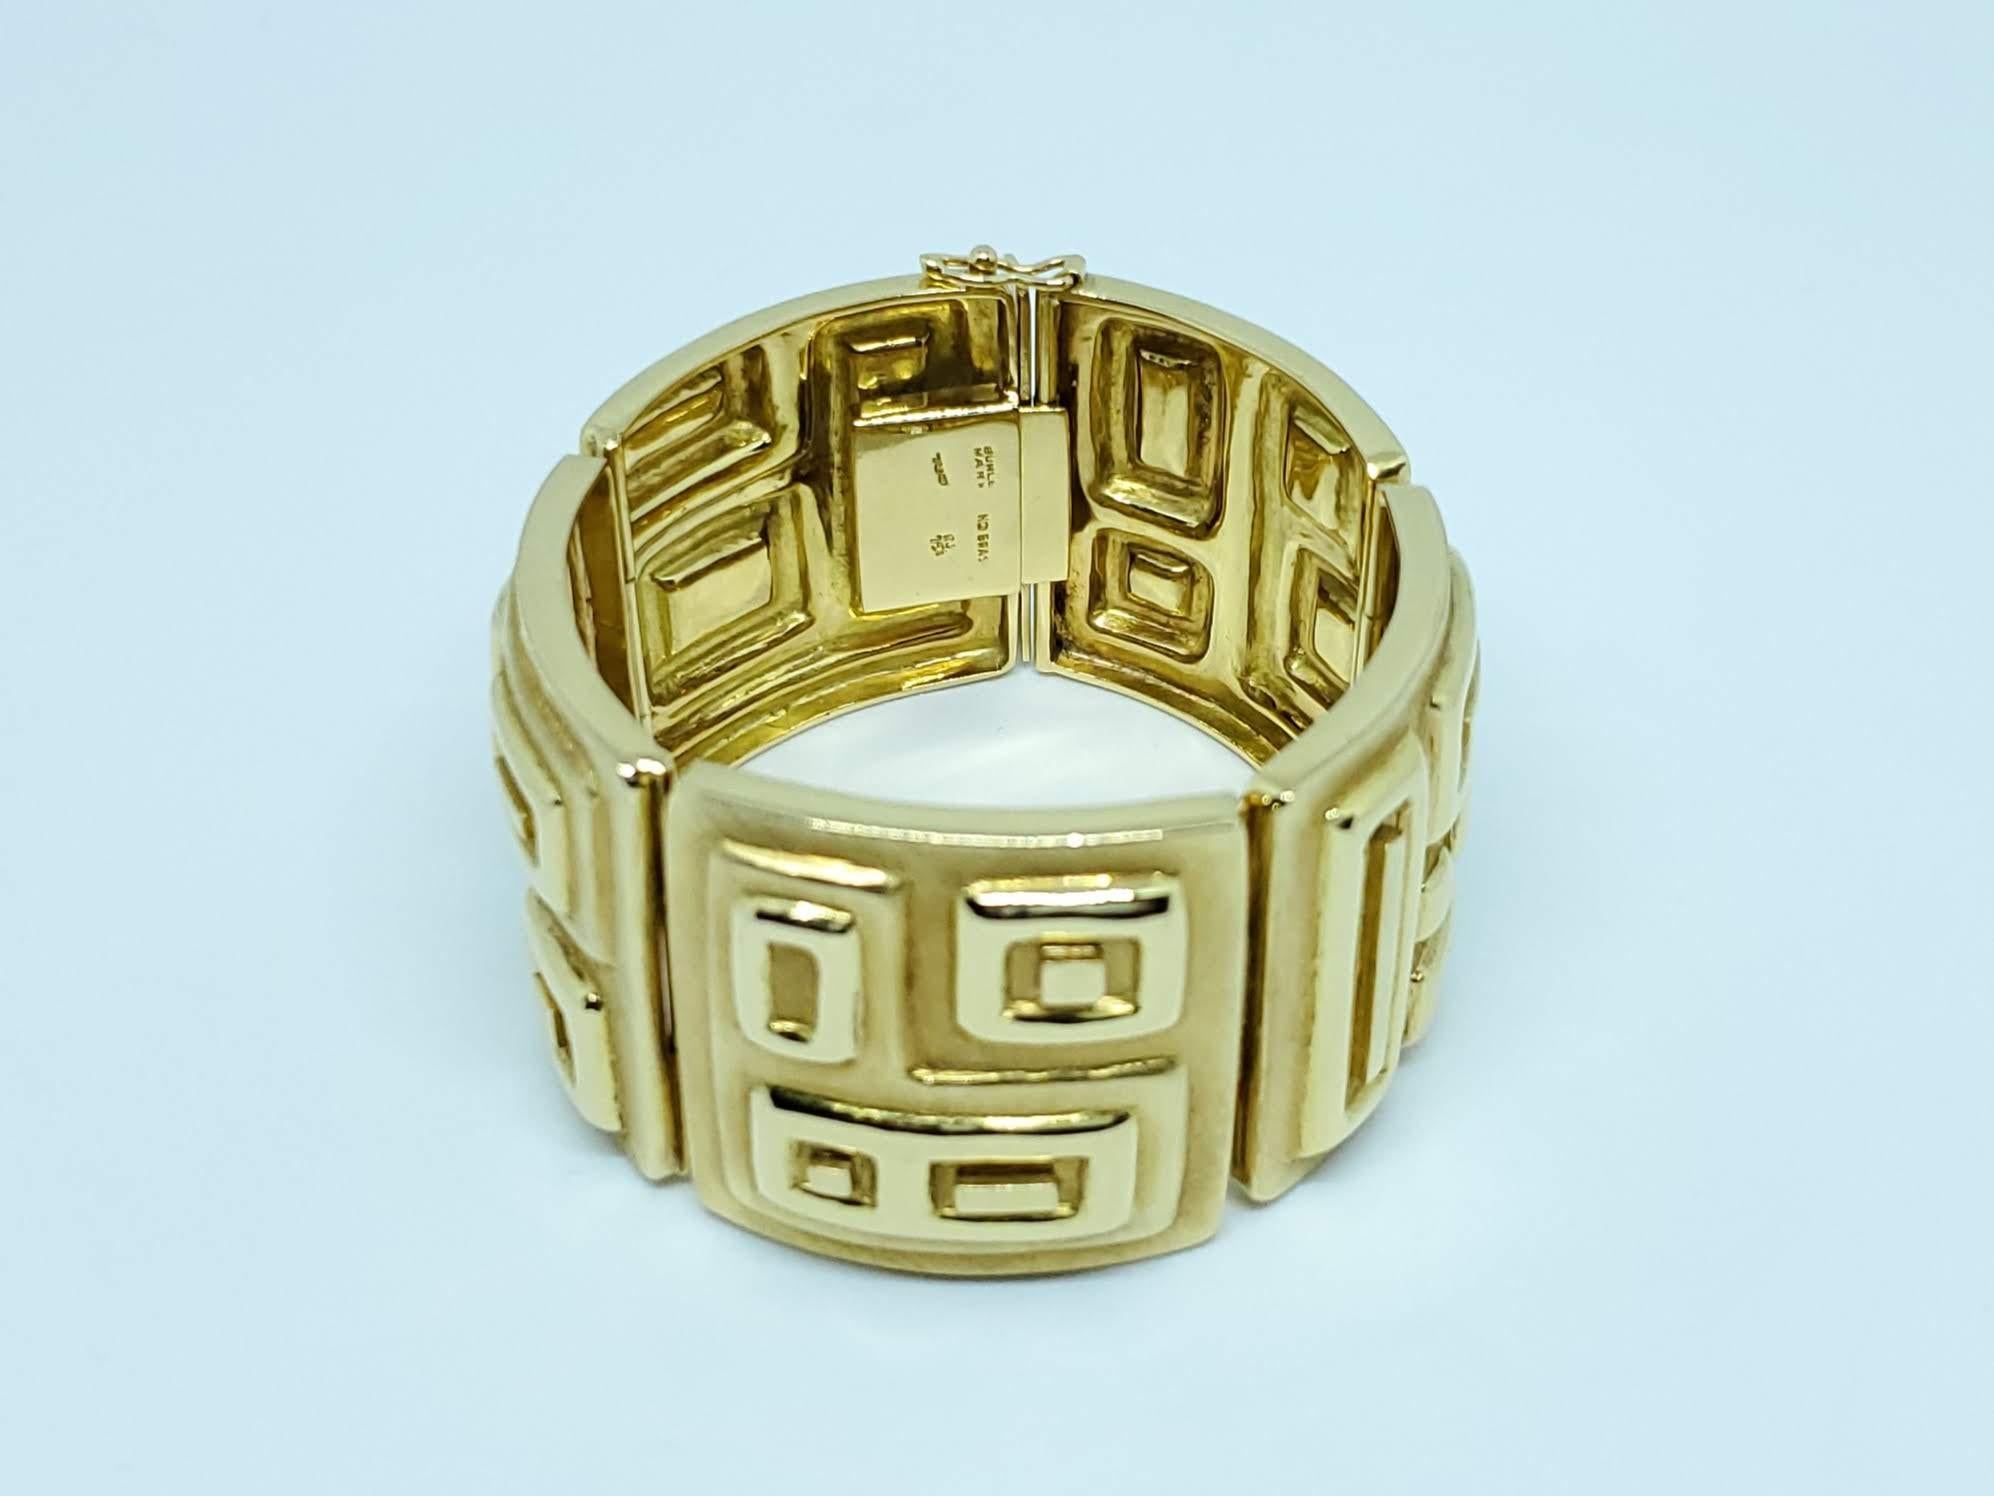 Thanks for taking a look at this rare gold bracelet made by Burle Marx. This piece is 7 inches long by 1 3/4 inches wide, and is made with 89 grams of gold. Bracelets are quite rare, as are Burle Marx bracelets wider than one inch. Do not miss out